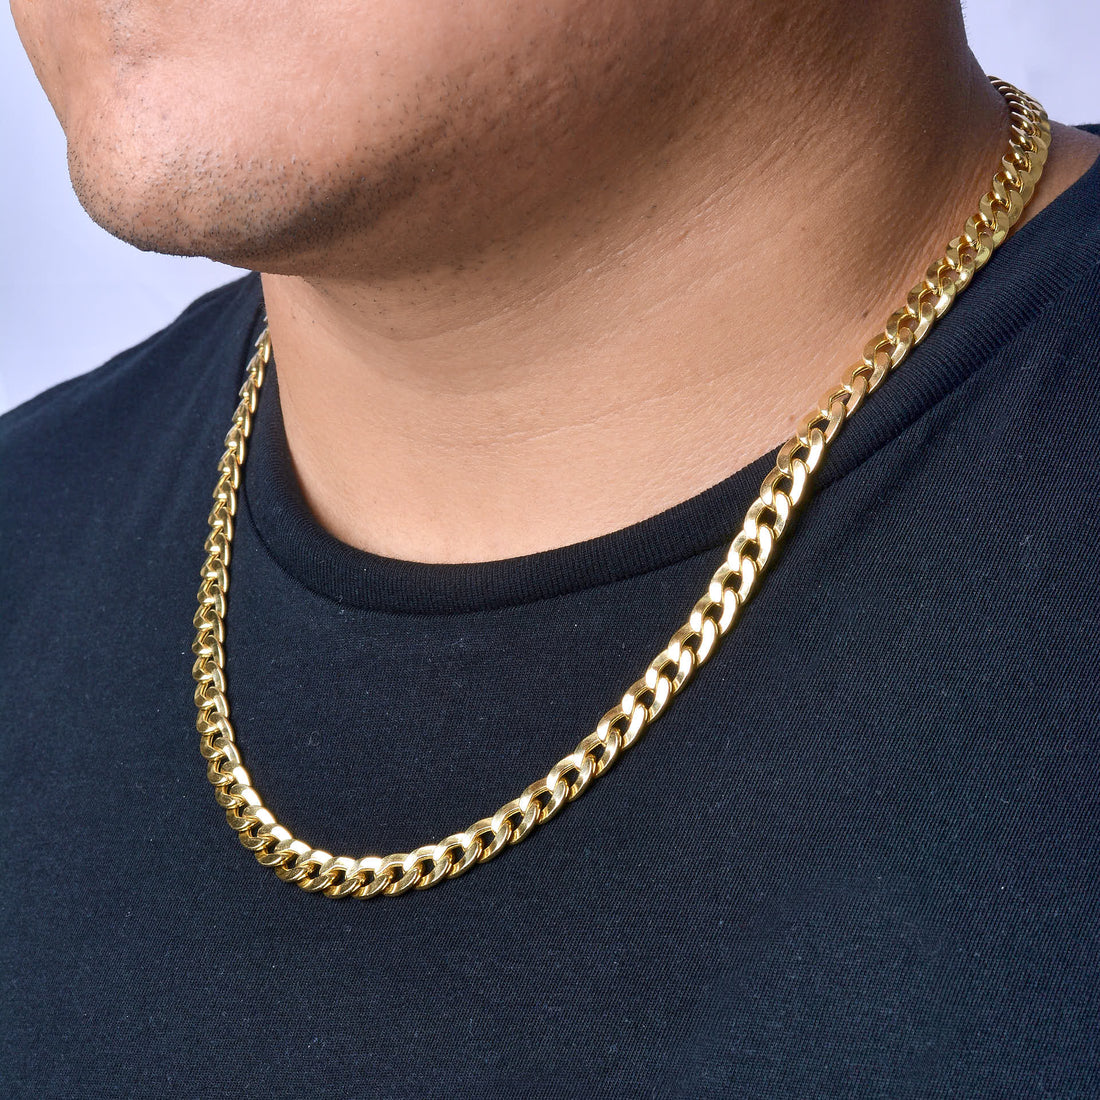 The Cuban Link is More Than Just a Chain